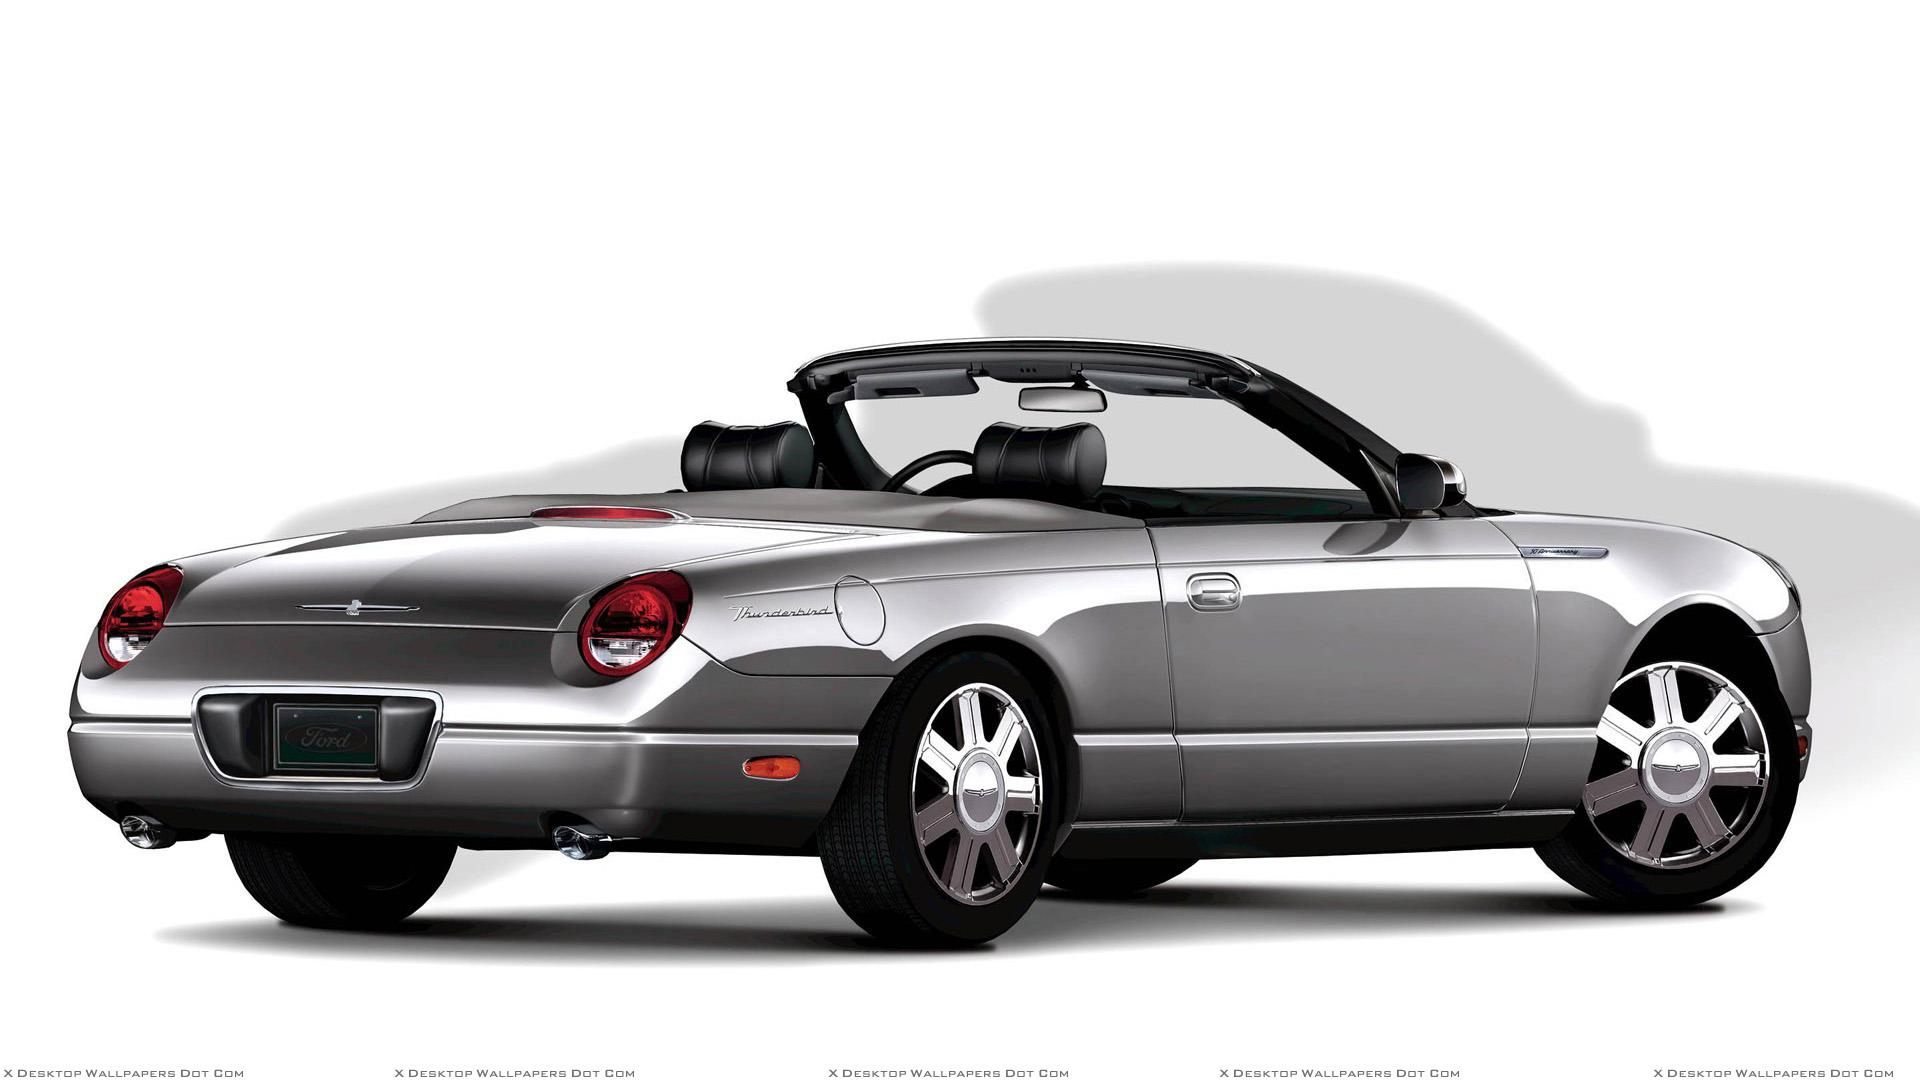 Ford Thunderbird Wallpaper, Photo & Image in HD